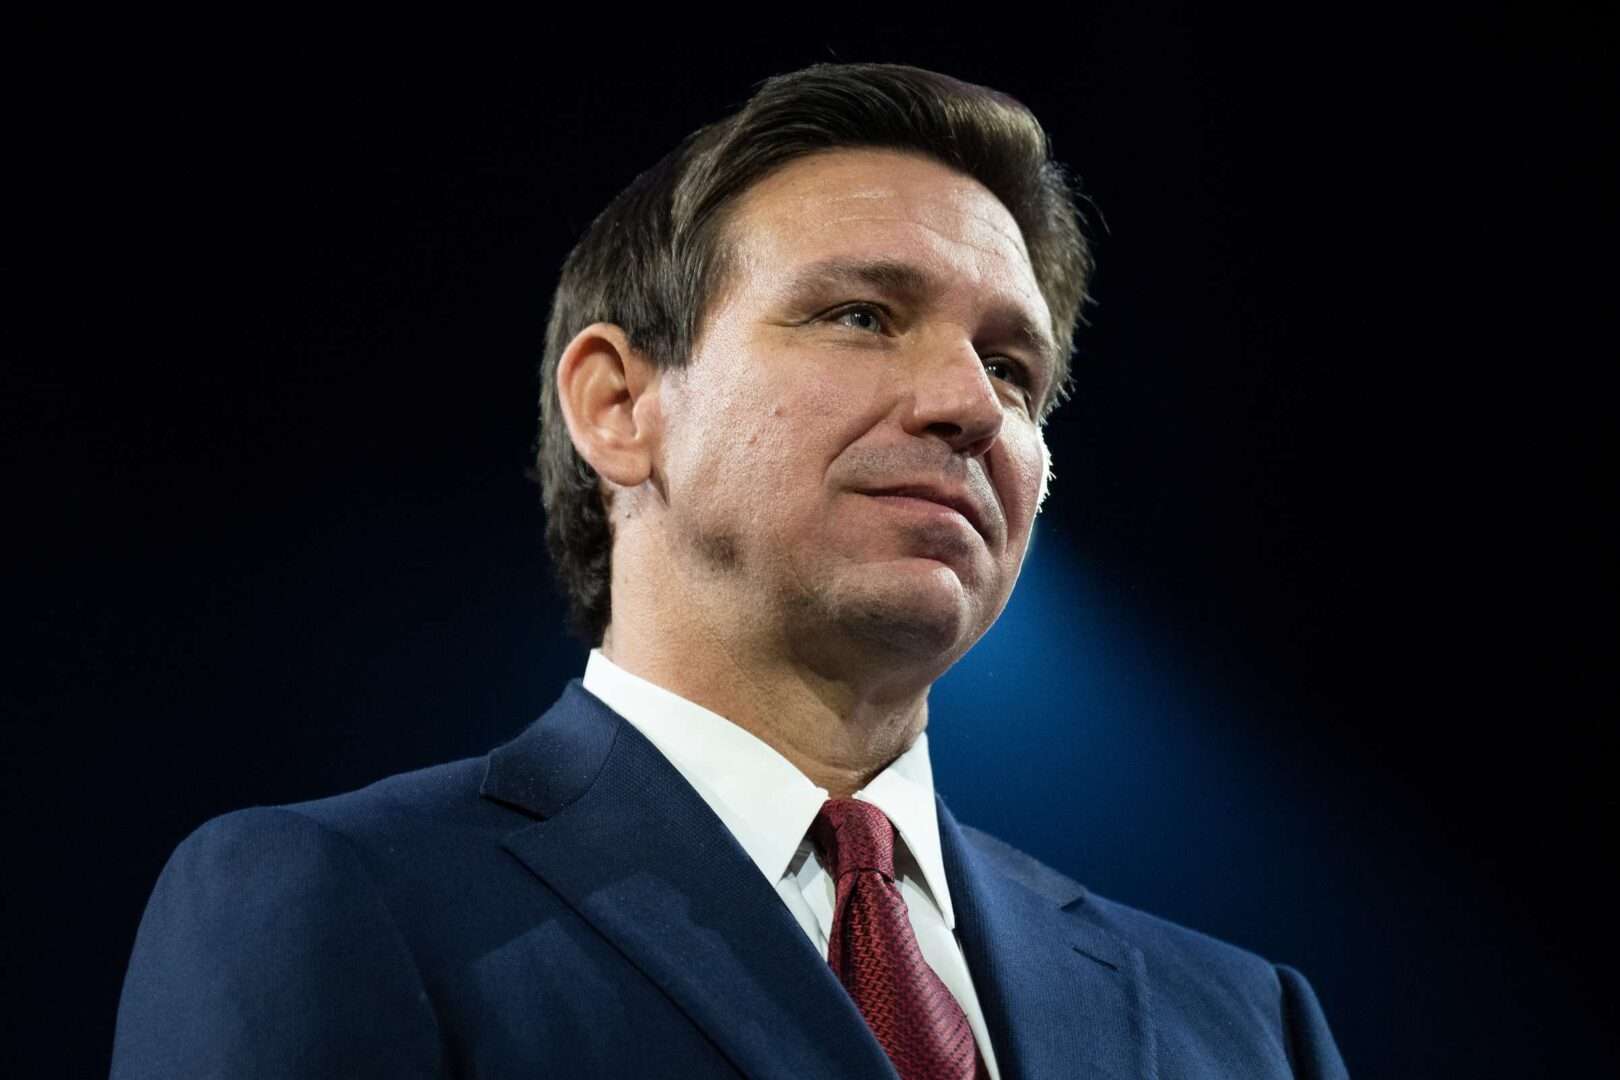 How To Watch Desantis On Twitter